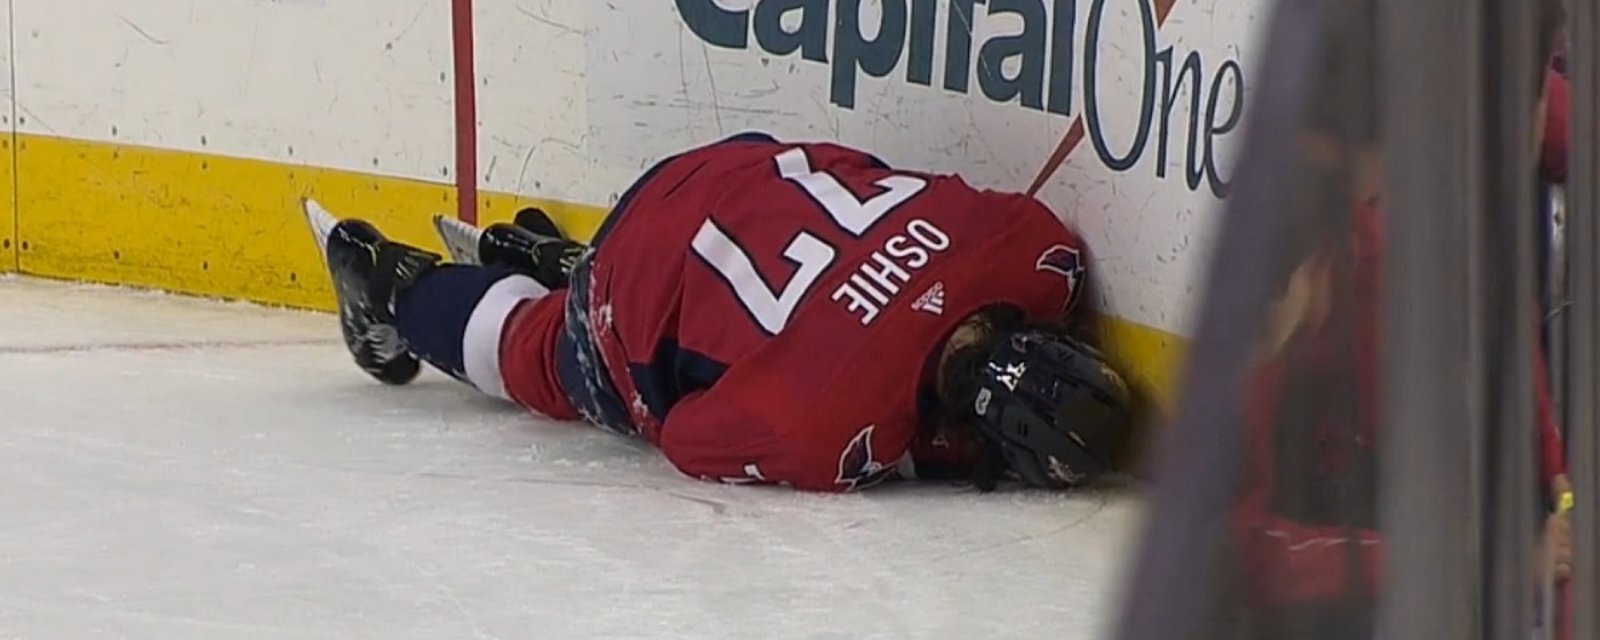 Breaking: the worst is confirmed for Oshie after vicious hit to the head! 